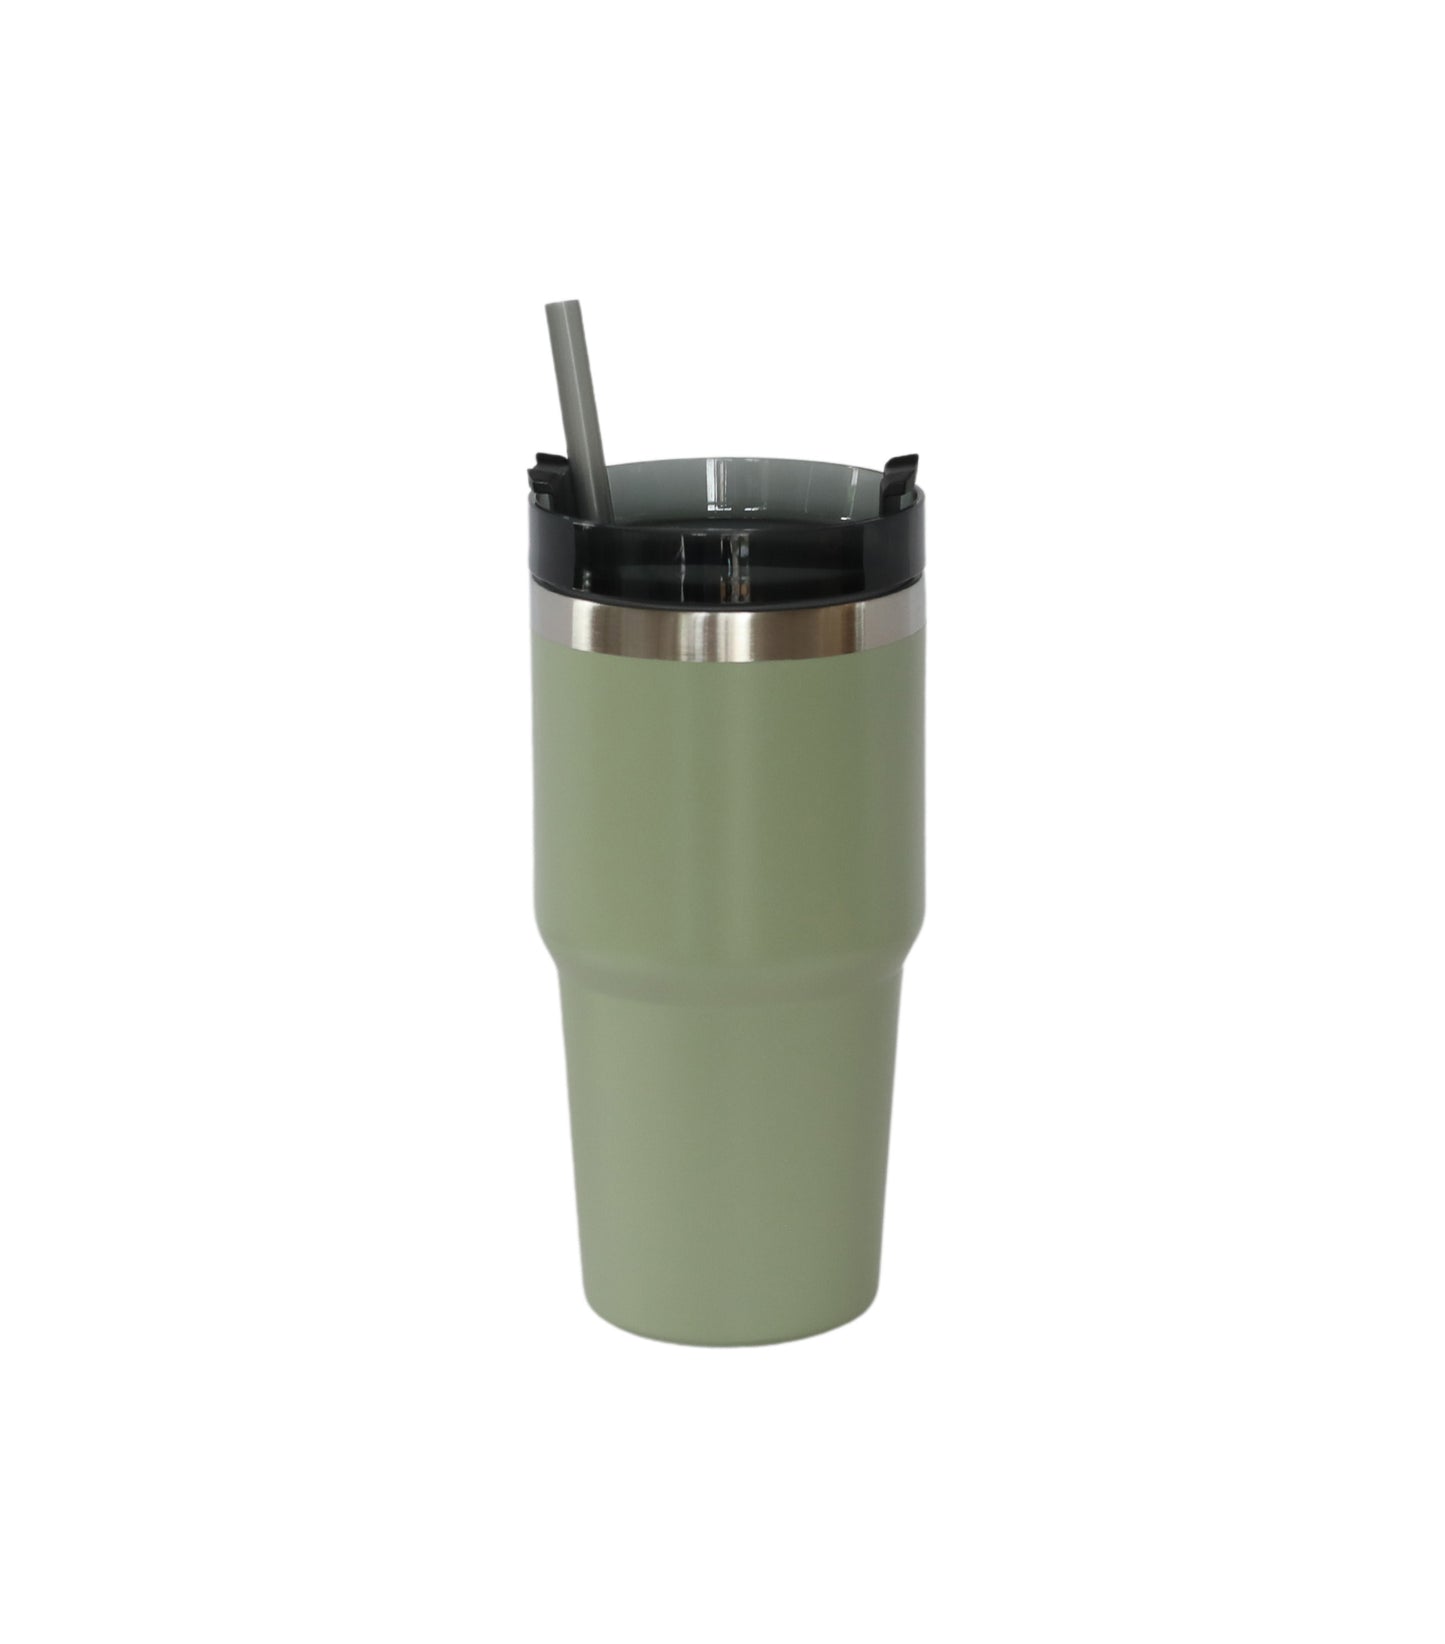 20 Oz Stainless Steel Tumbler with Straw - Sage Green